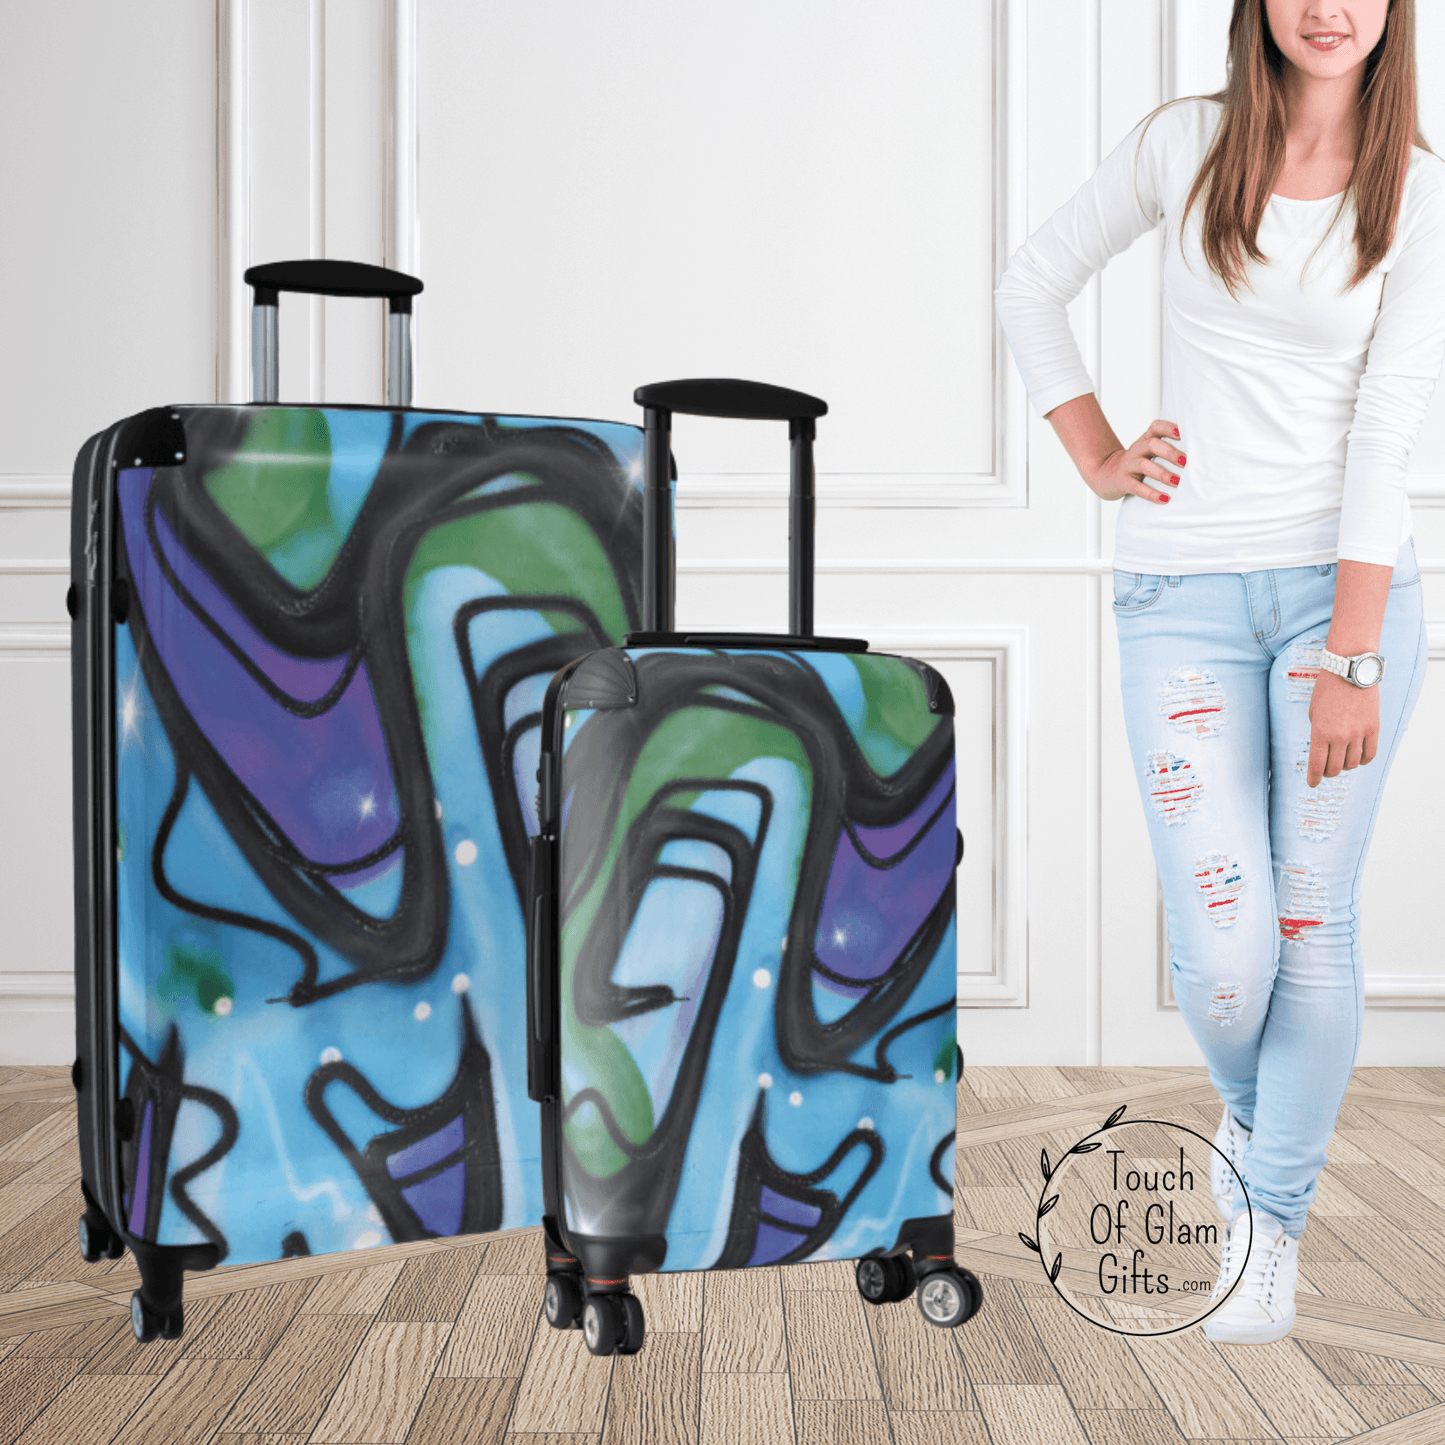 Teen girls love the blue retro design of our luggage. This teen girl has the large suitcase with spinner wheels and the carry on size. The shades of blue and black and green in a graffiti design has a retro feel.